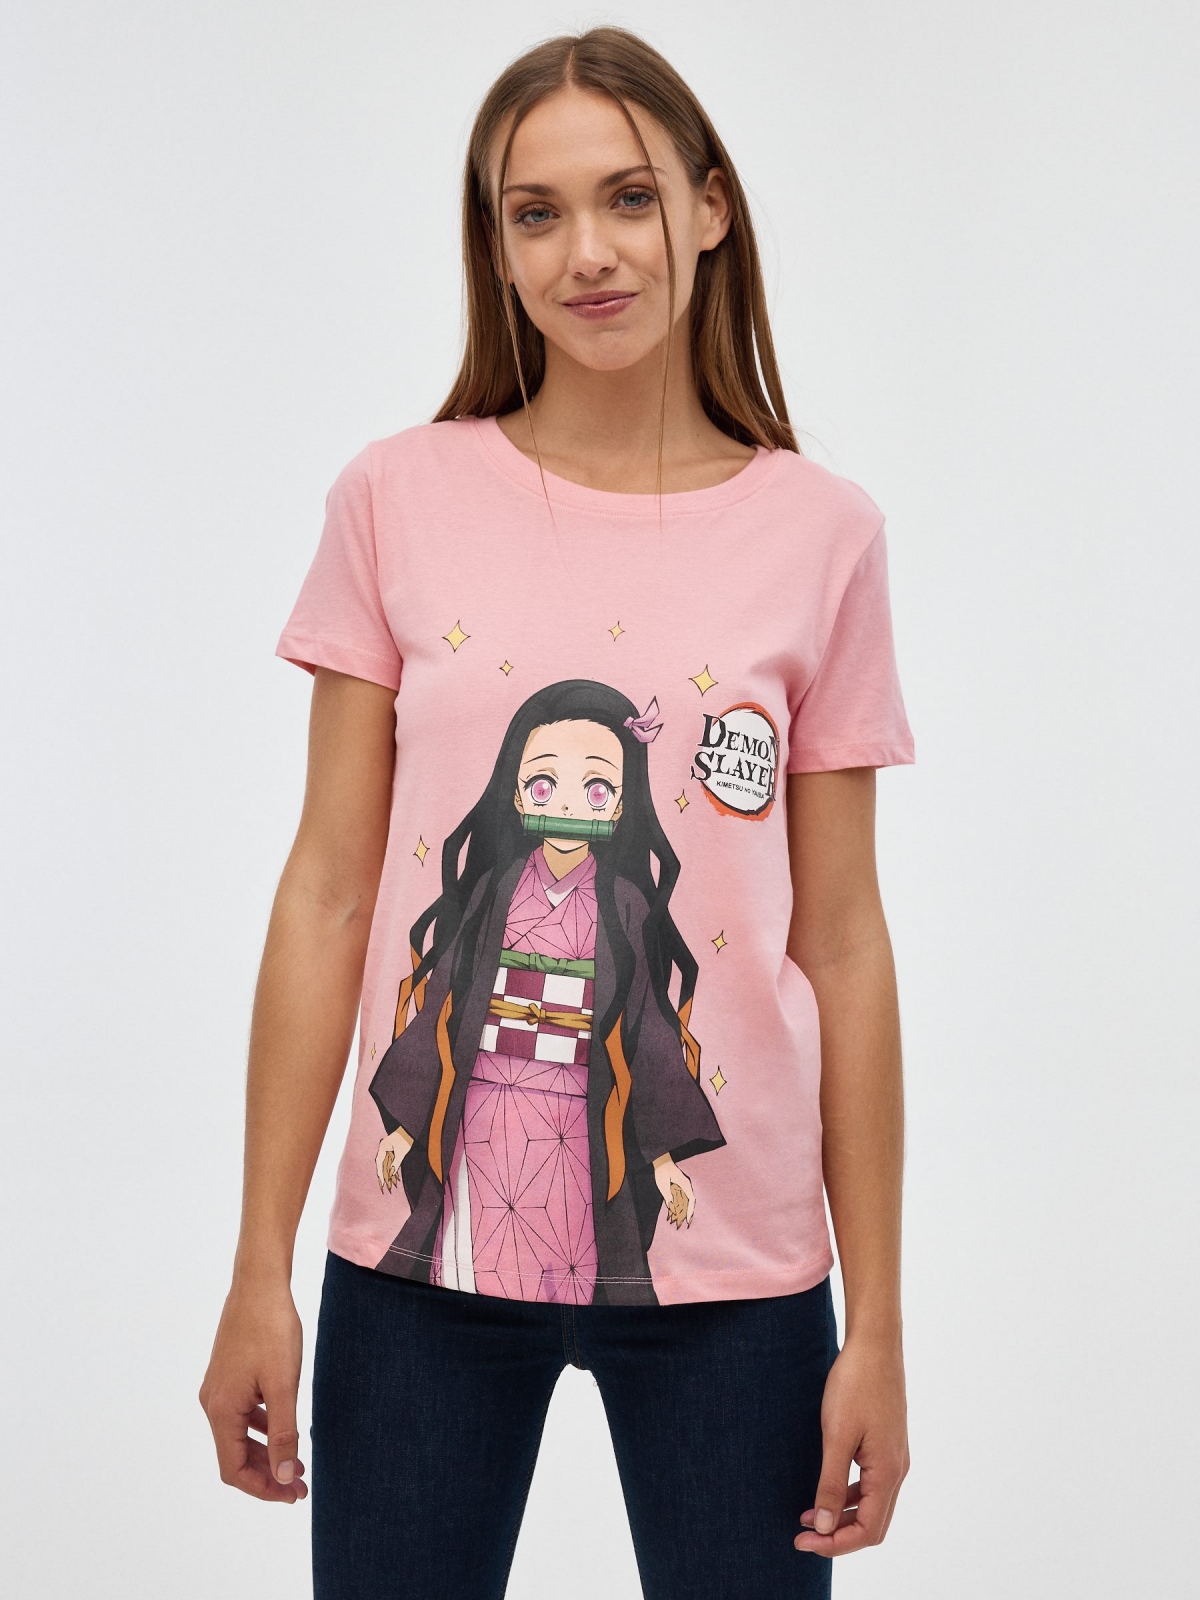 Demon Slayer T-shirt light pink middle front view